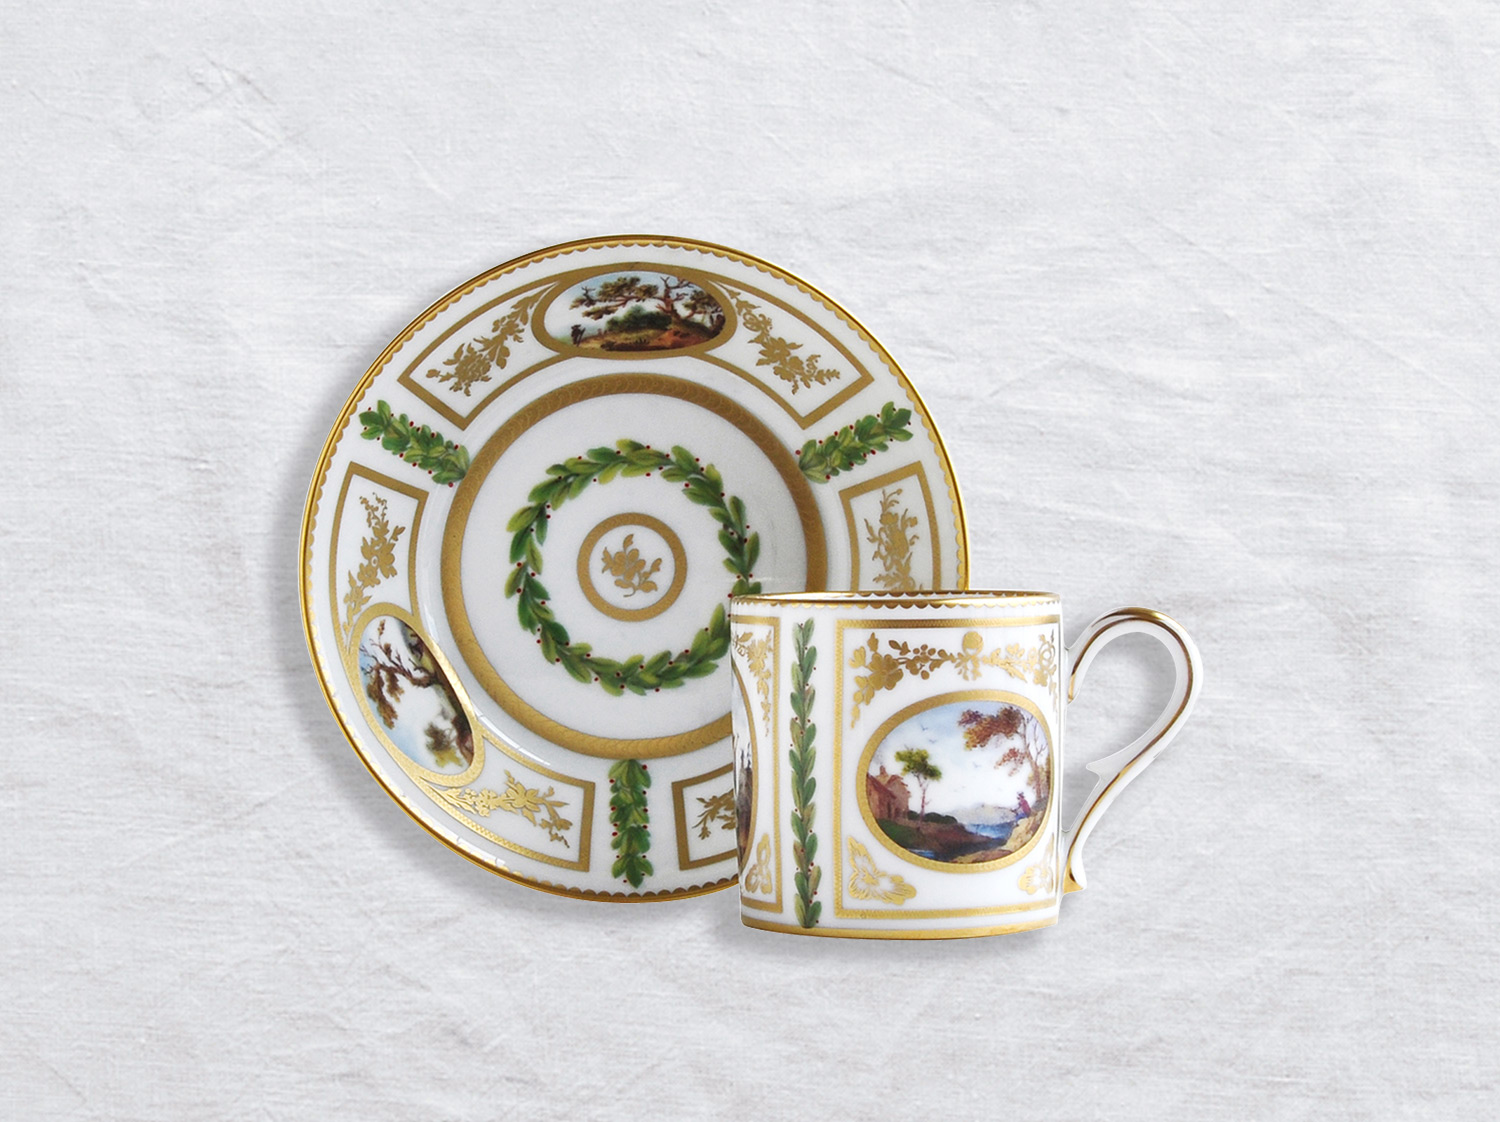 China Litron cup & saucer of the collection Le timbalier chinois | Bernardaud